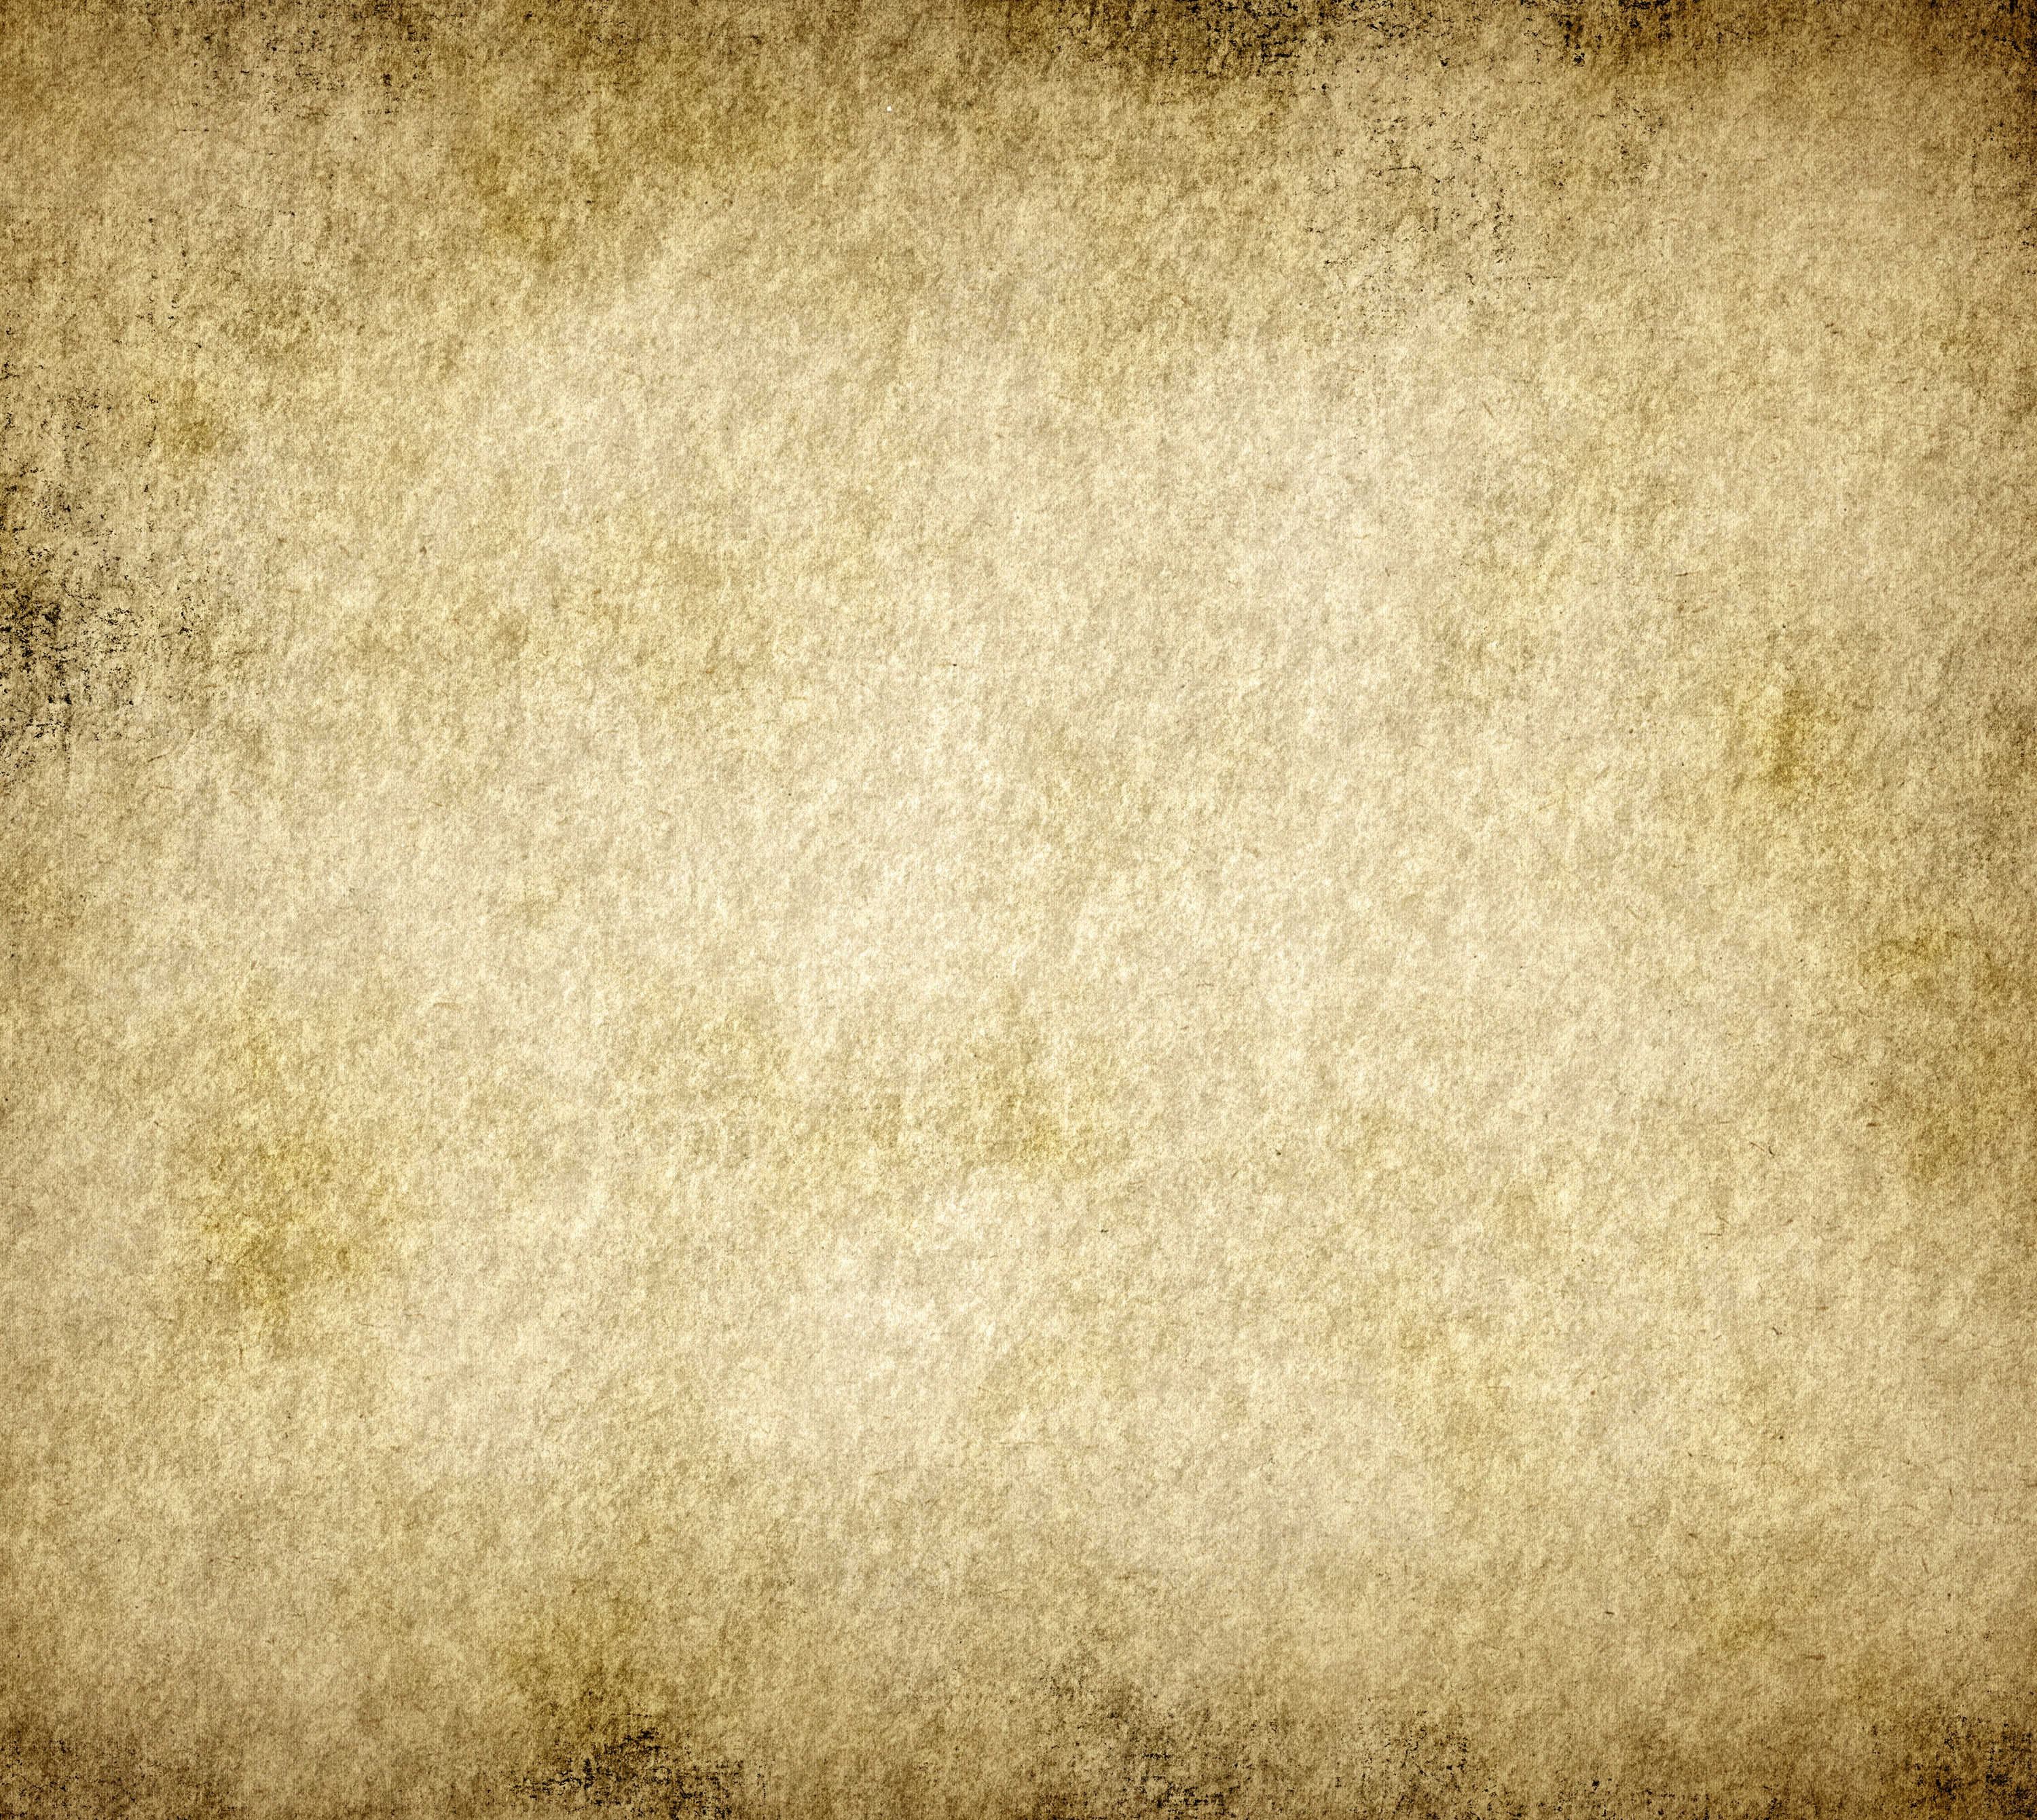 Free Photo  Vintage grungy textured paper background